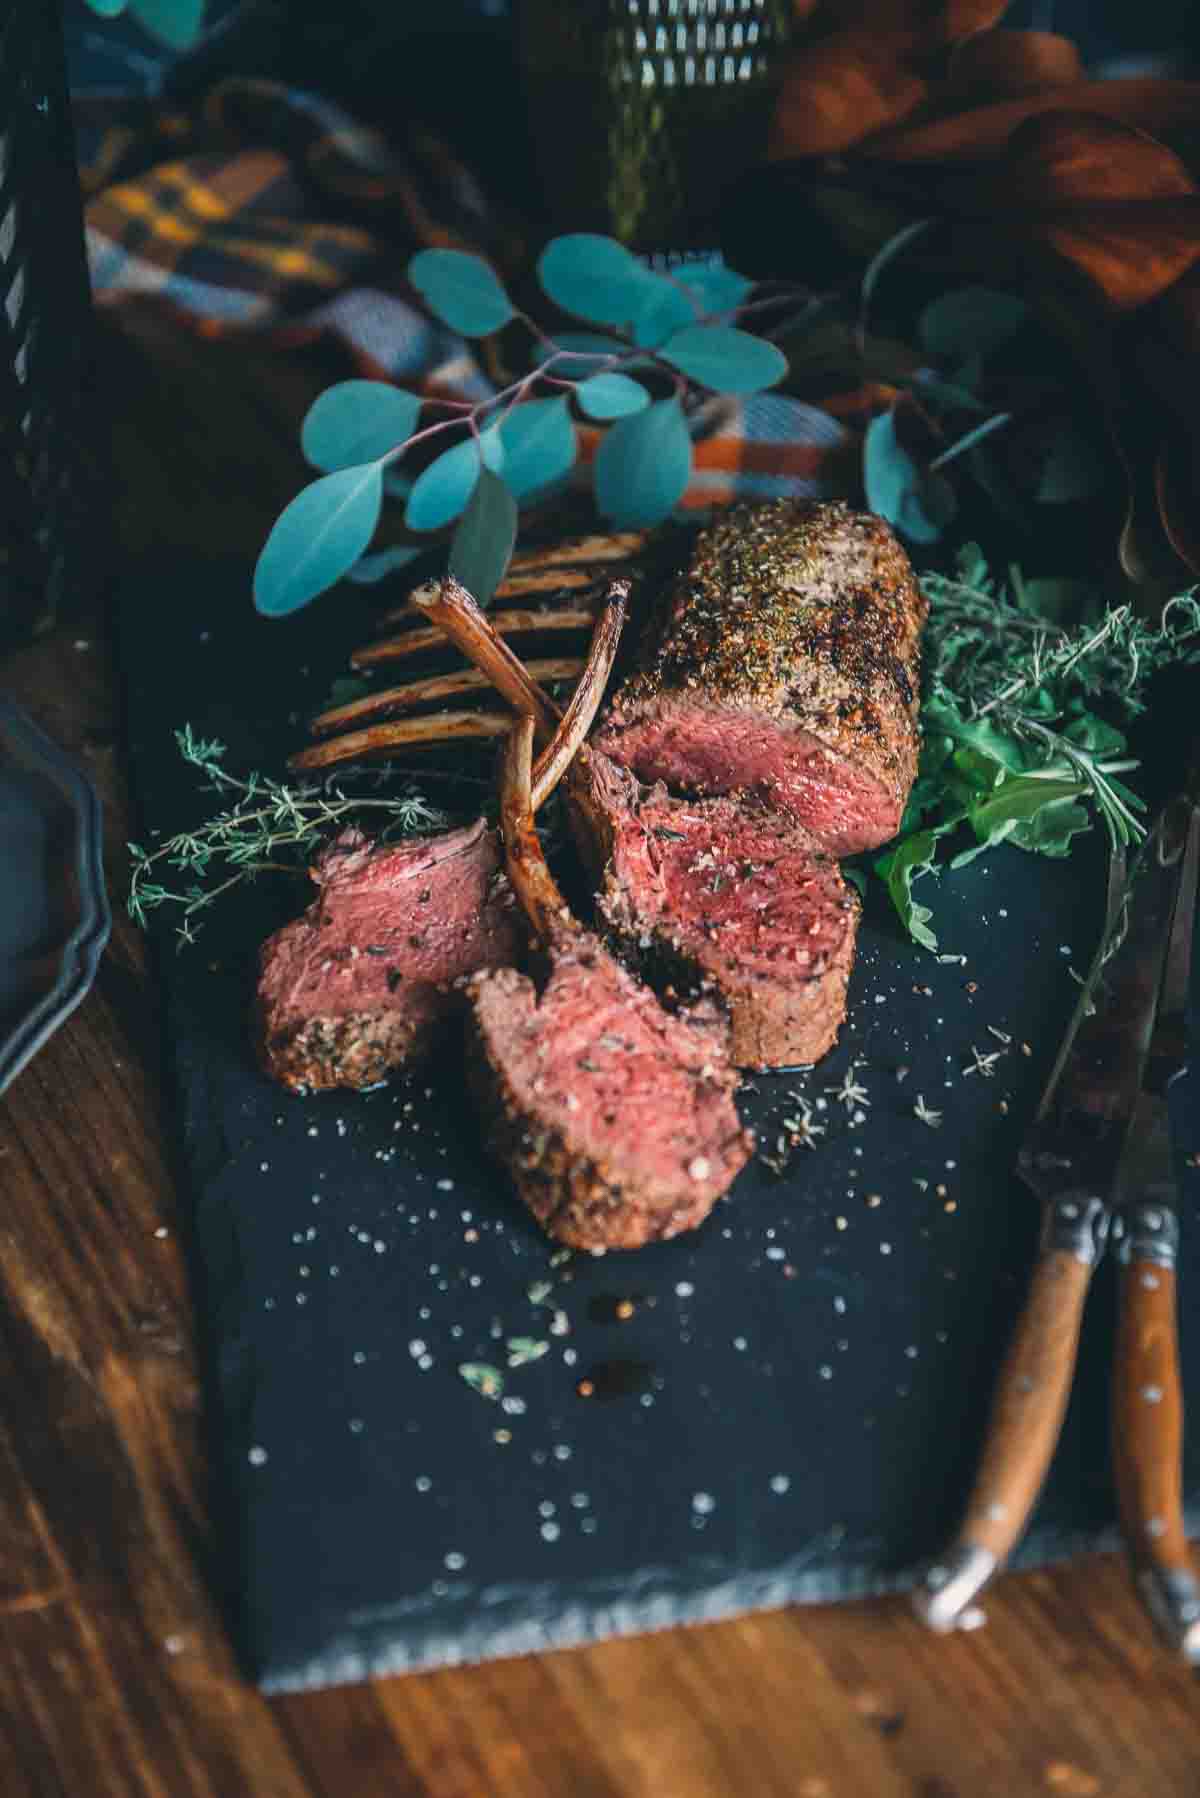 Showing a rack of venison with three slices carved on a slake board with carving fork and knife and herbs. 